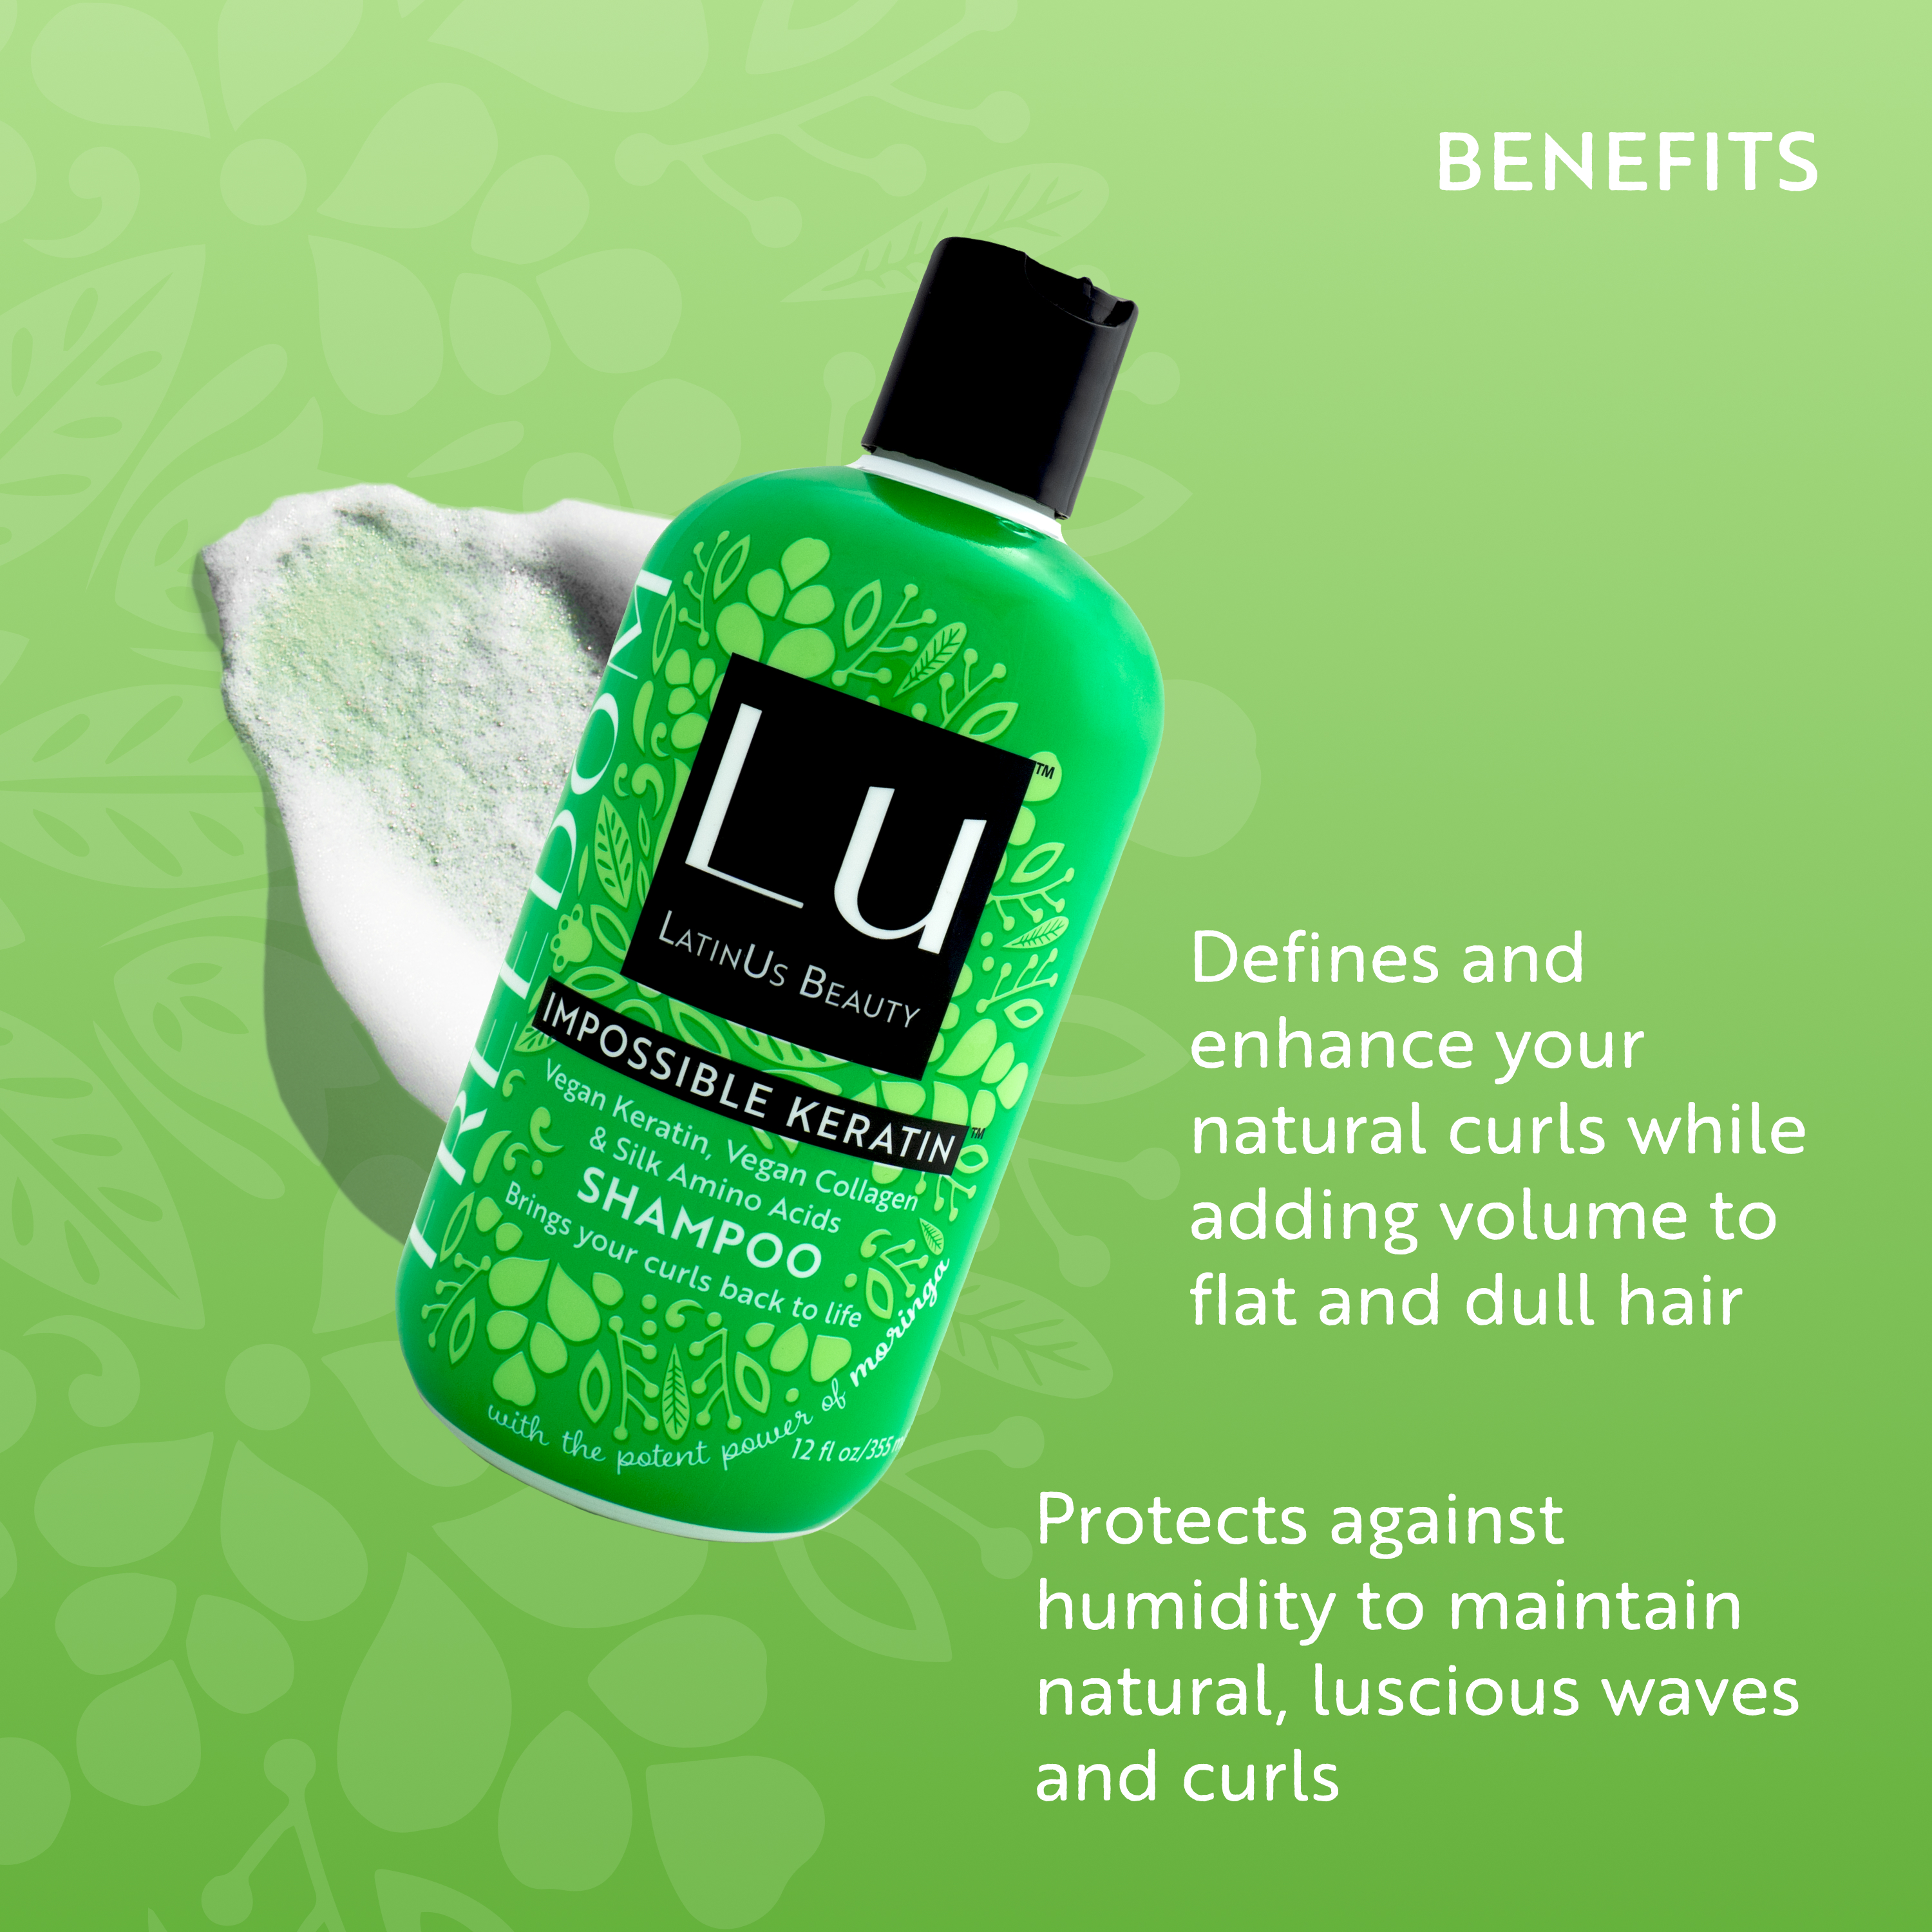 LU LatinUs Beauty Freedom Curl Enhancing Shampoo with Impossible Keratin & Natural Oils, for All Hair Types,12 oz - image 4 of 10